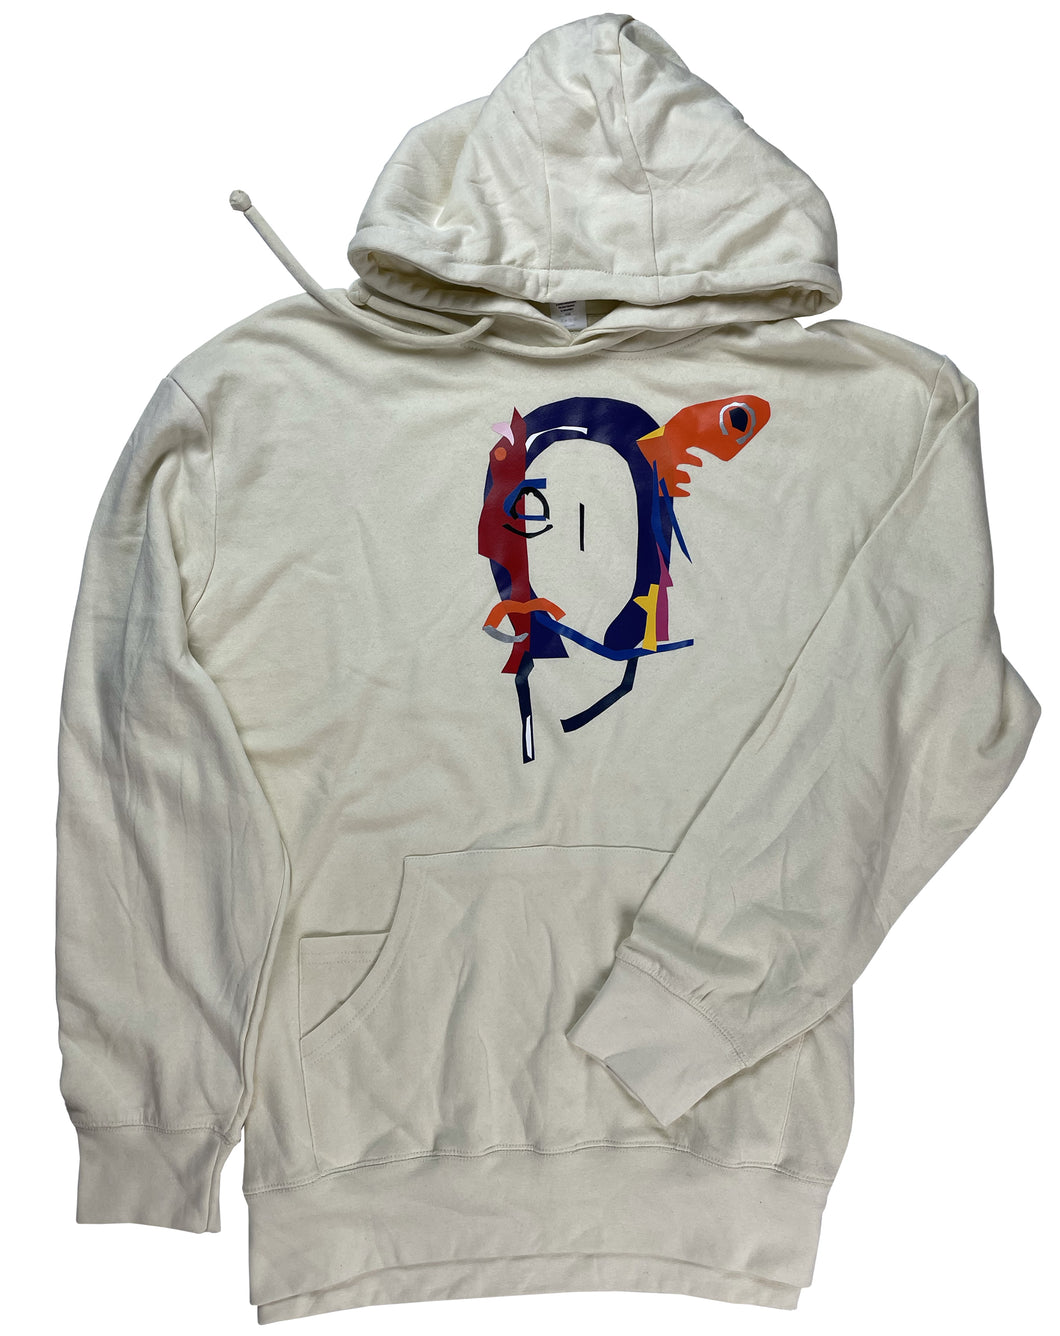 Goldfinch Perspectives - Size XL - Hoodie